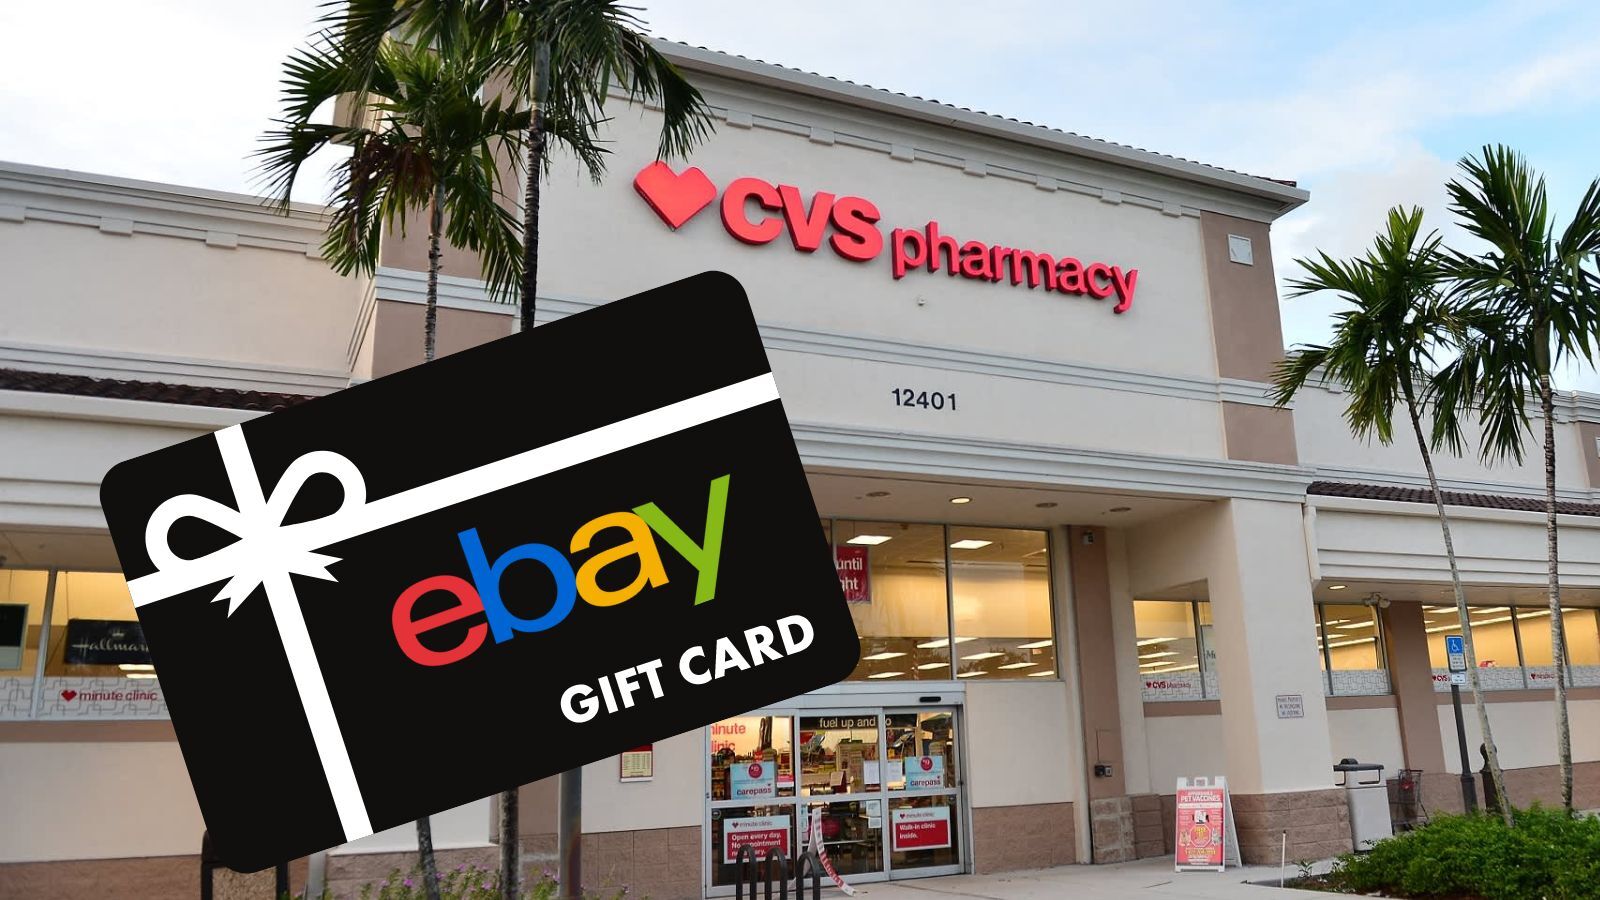 Does CVS Sell eBay Gift Cards? (Yes, But Not All of Their Stores)